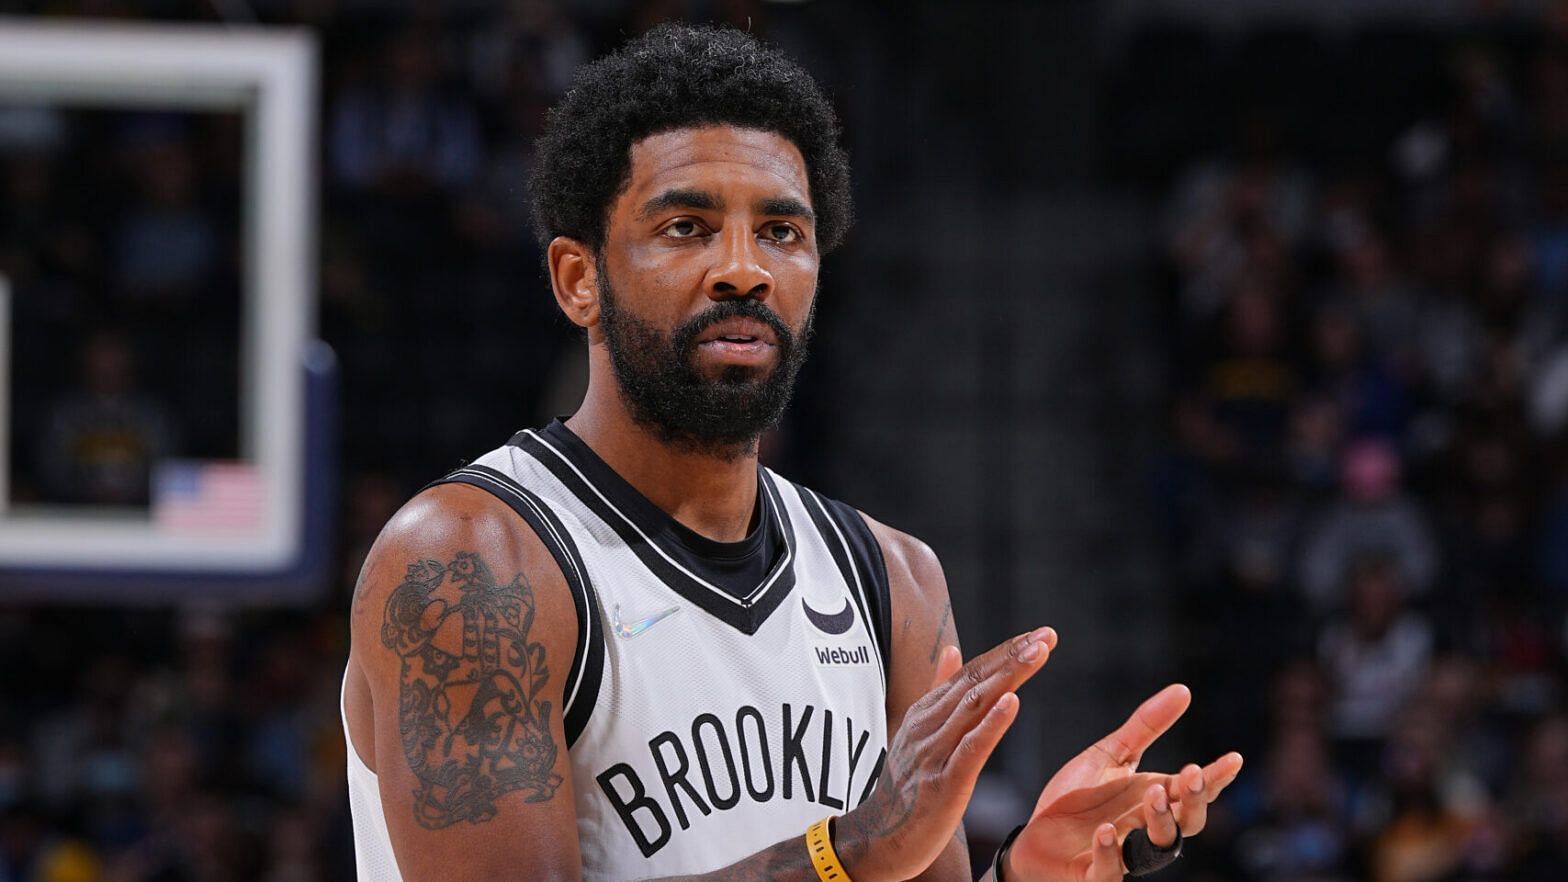 Kyrie Irving is still only available in games away from Barclays Center. [Photo: NBA.com]